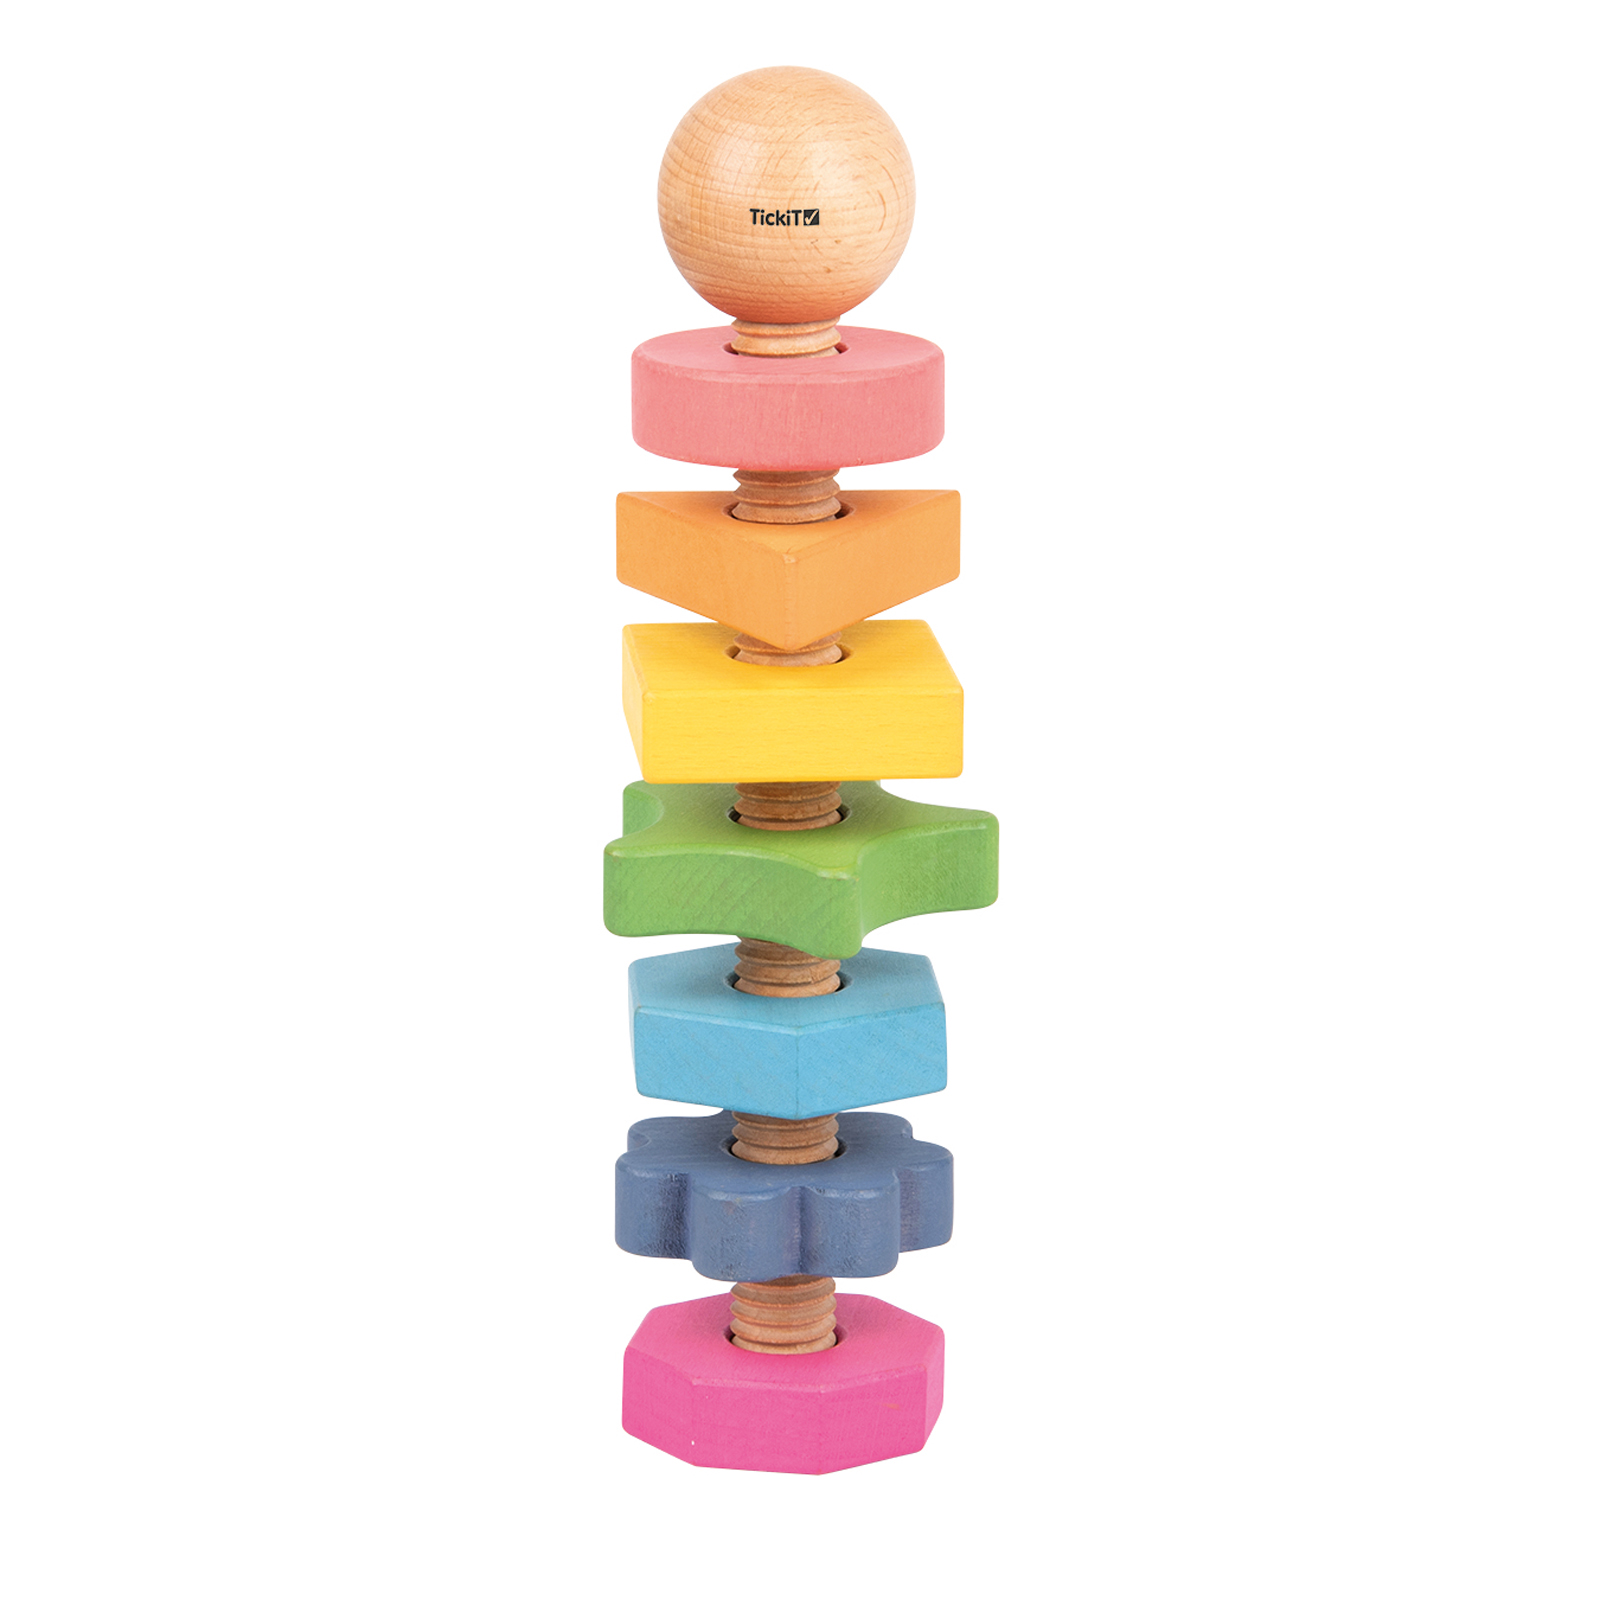 TickiT Rainbow Wooden Shape Twister - 7 Shapes and Colors